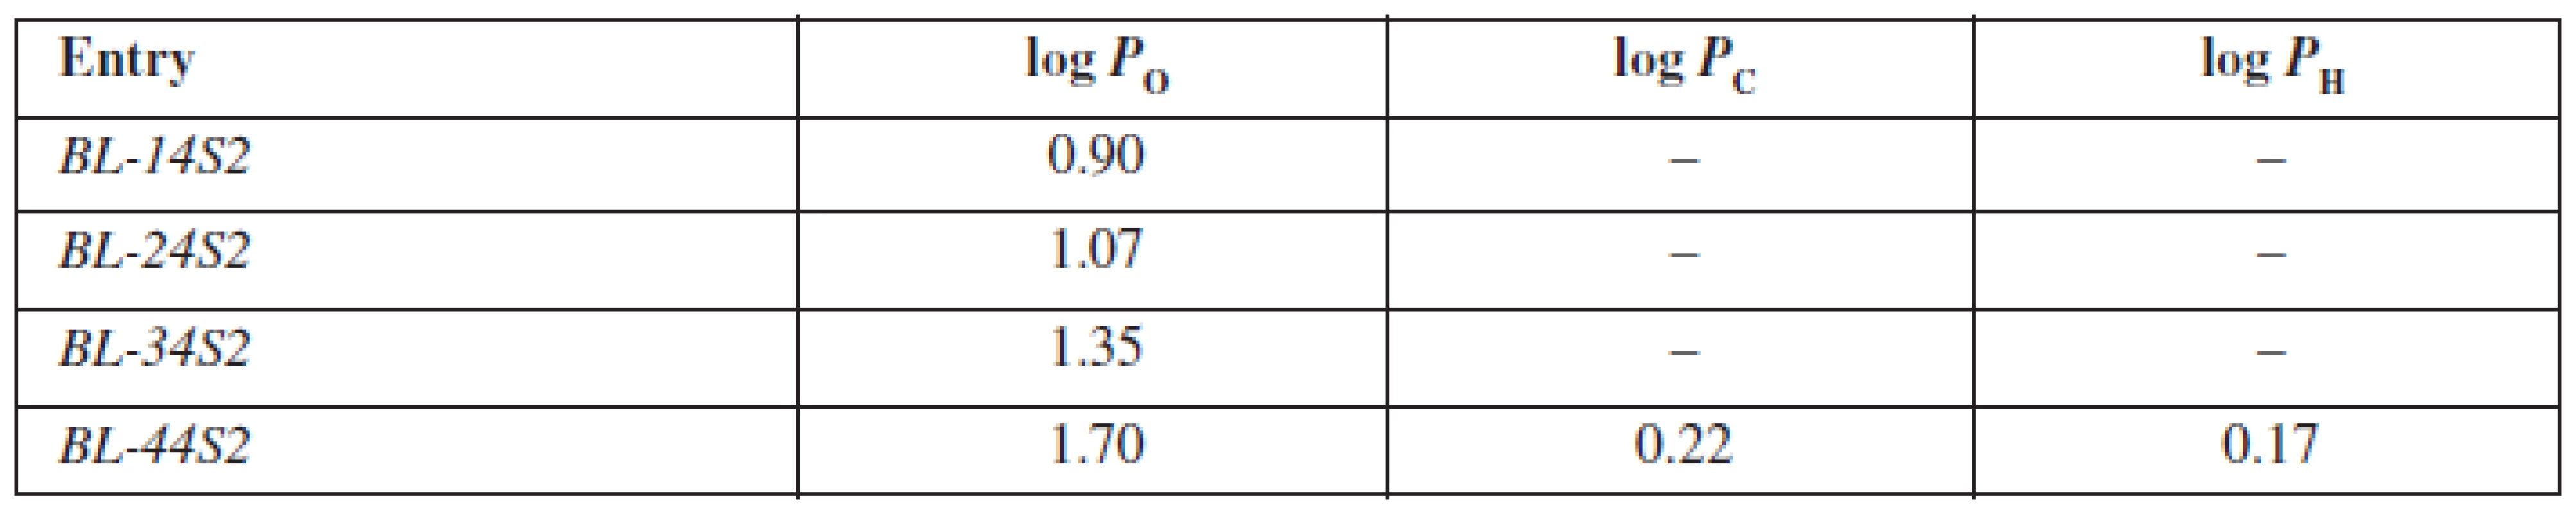 Experimentally estimated values of partition coefficients for inspected compounds BL-14S2-BL-A4S2 in octan-1-ol/phospate buffer (log P&lt;sub&gt;O&lt;/sub&gt;), cyclohexane/phosphate buffer (log P&lt;sub&gt;C&lt;/sub&gt;) and heptane/phosphate buffer (log P&lt;sub&gt;H&lt;/sub&gt;)